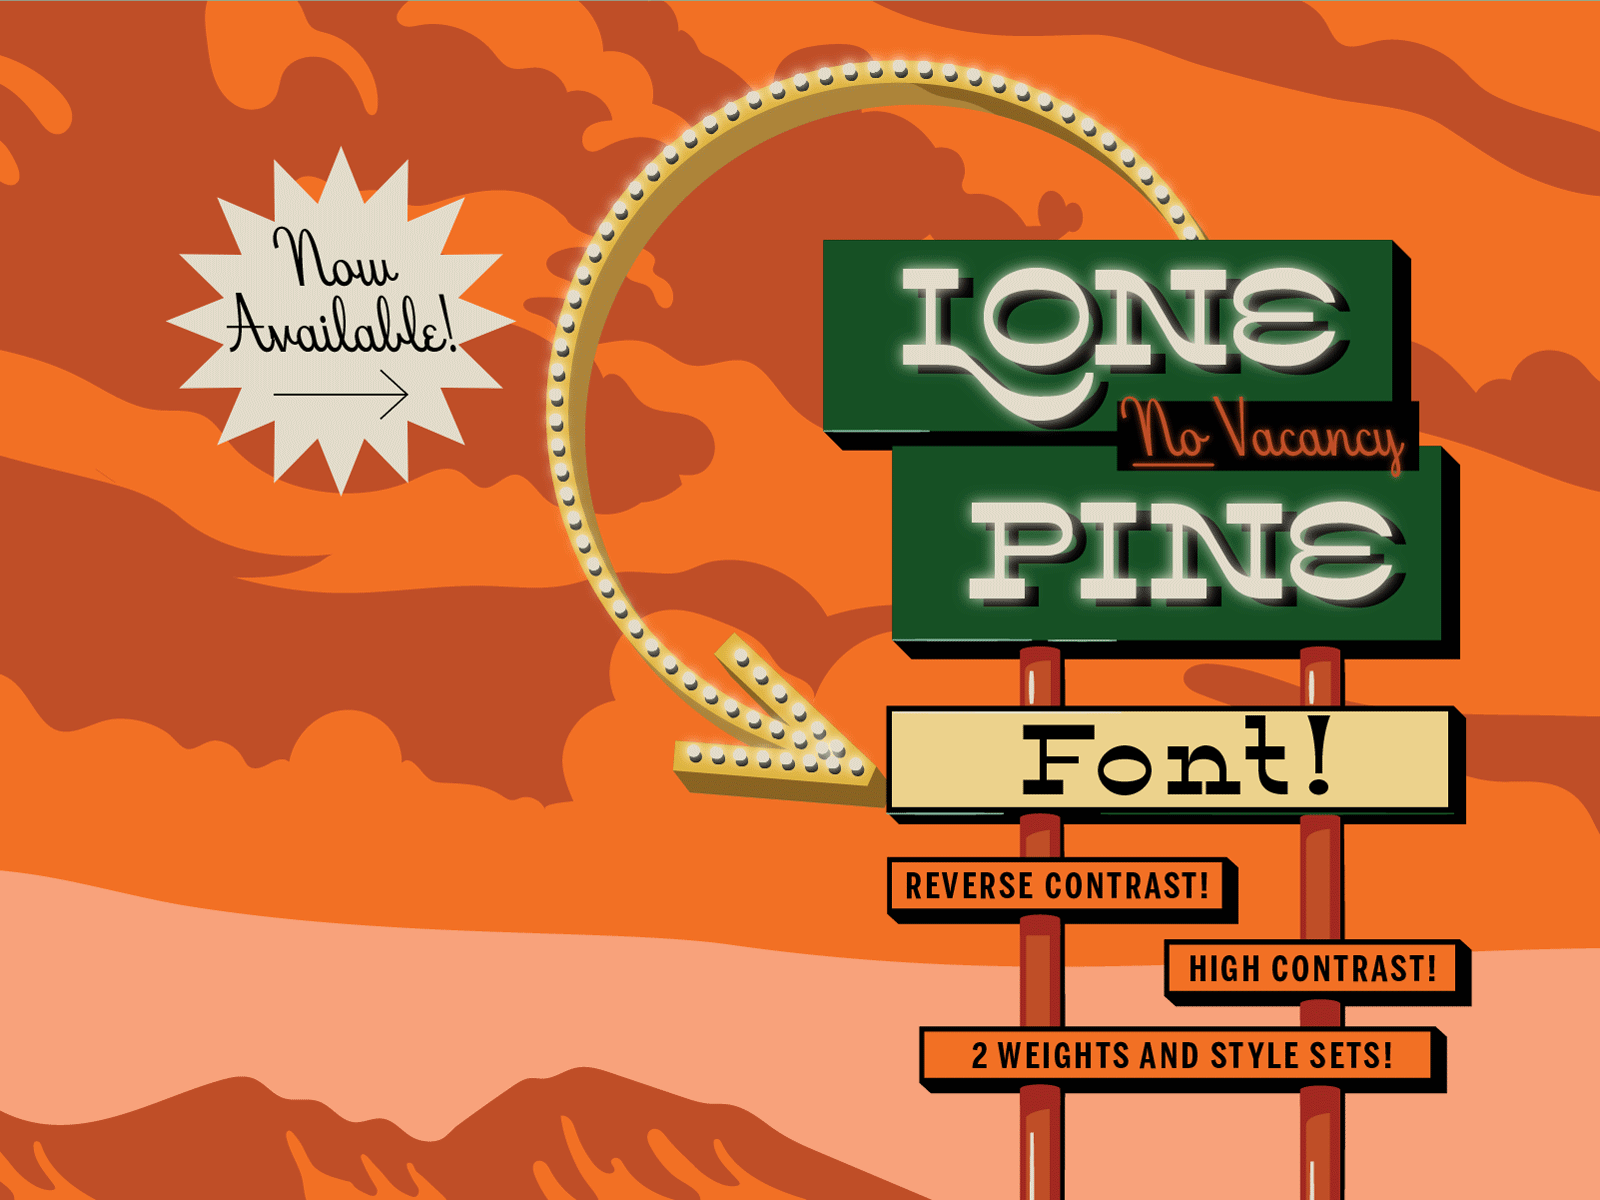 Lone Pine Font is Here! animated gif animated gifs bold font font design funky high contrast hood fonts motel motel sign retro retro design reverse contrast serif swash